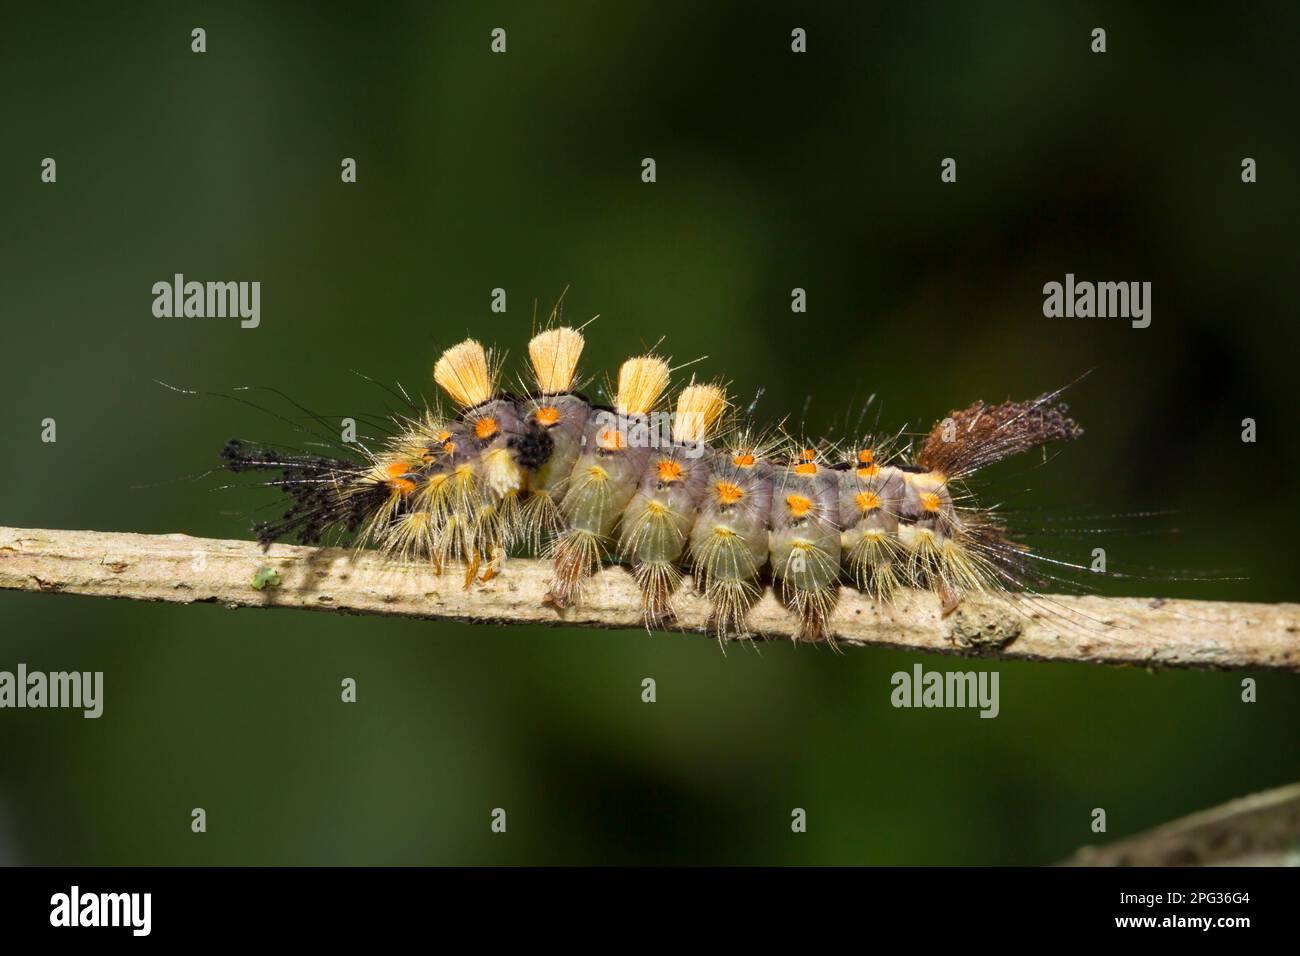 Vapourer Moth, Common Vapourer, Russy Tussock Moth (Orgyia antiqua), caterpillar on a twig. Germany. Stock Photo